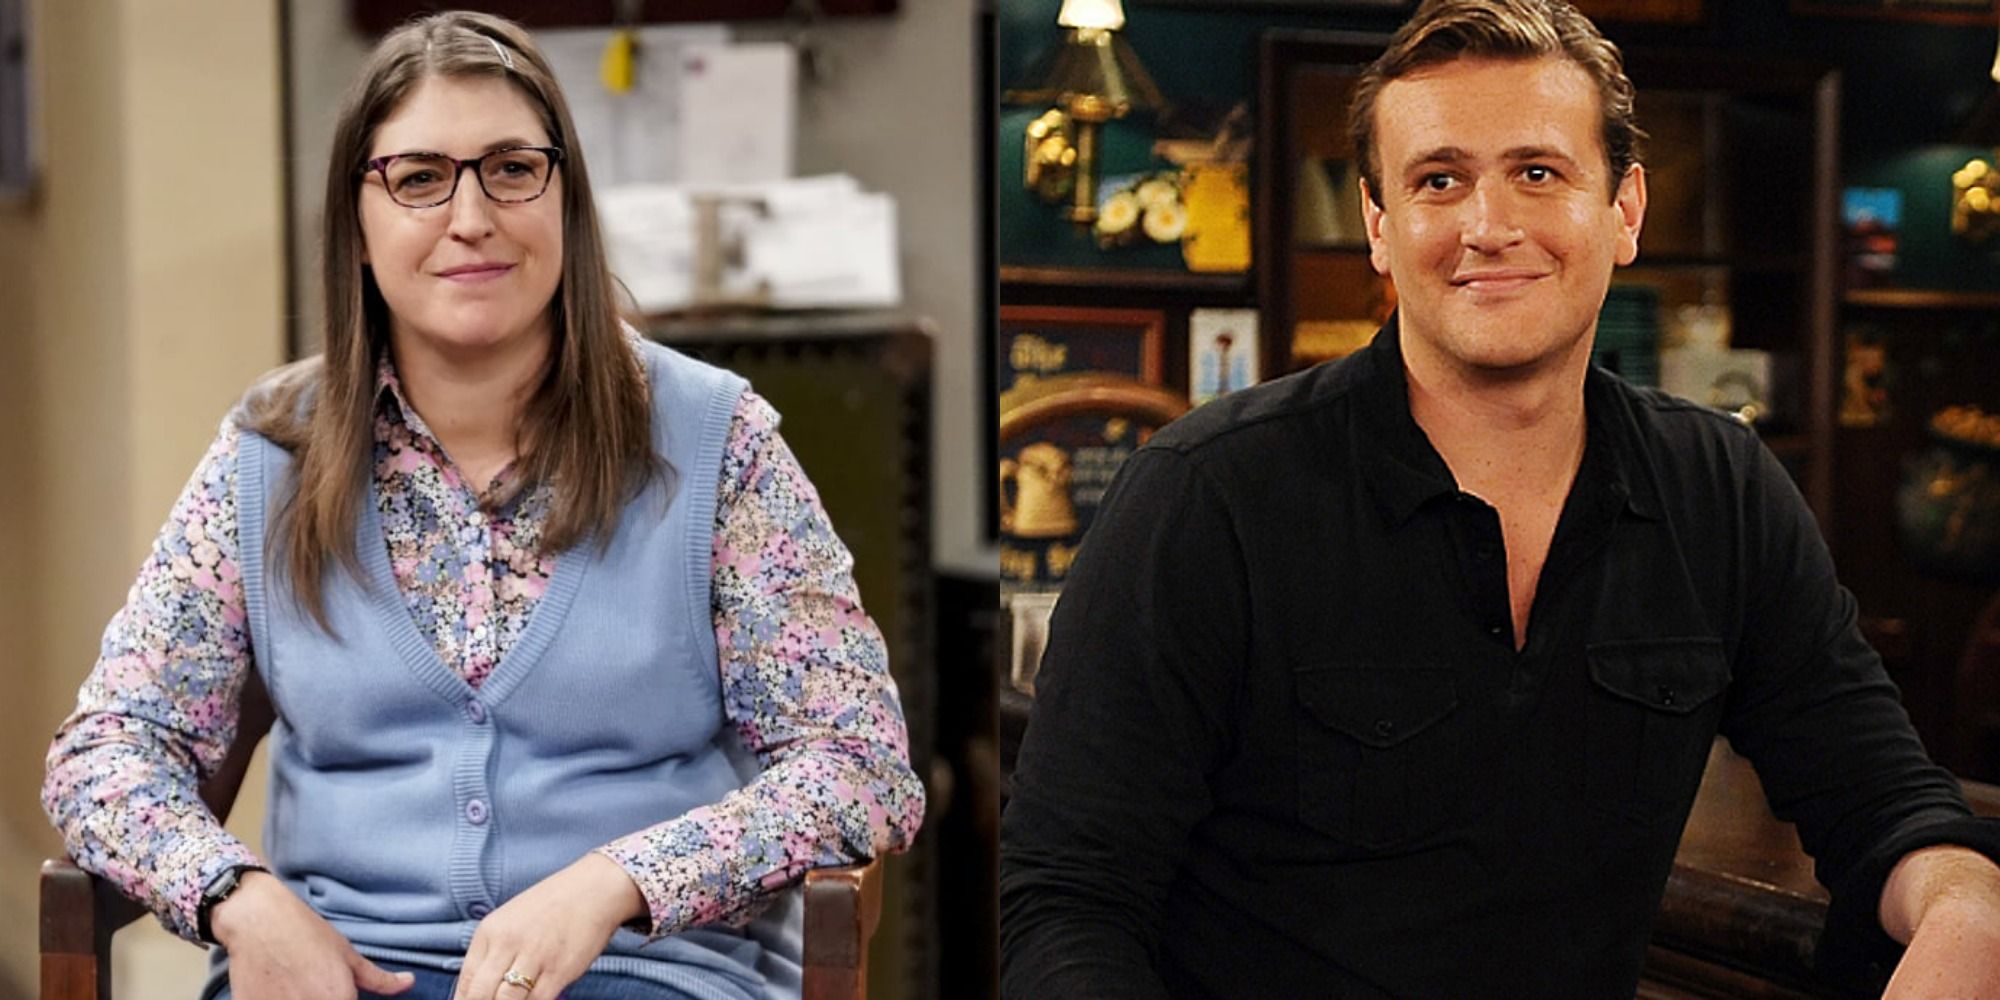 A split-screen image showing The Big Bang Theory's Amy Farrah Fowler and How I Met Your Mother's Marshall Eriksen